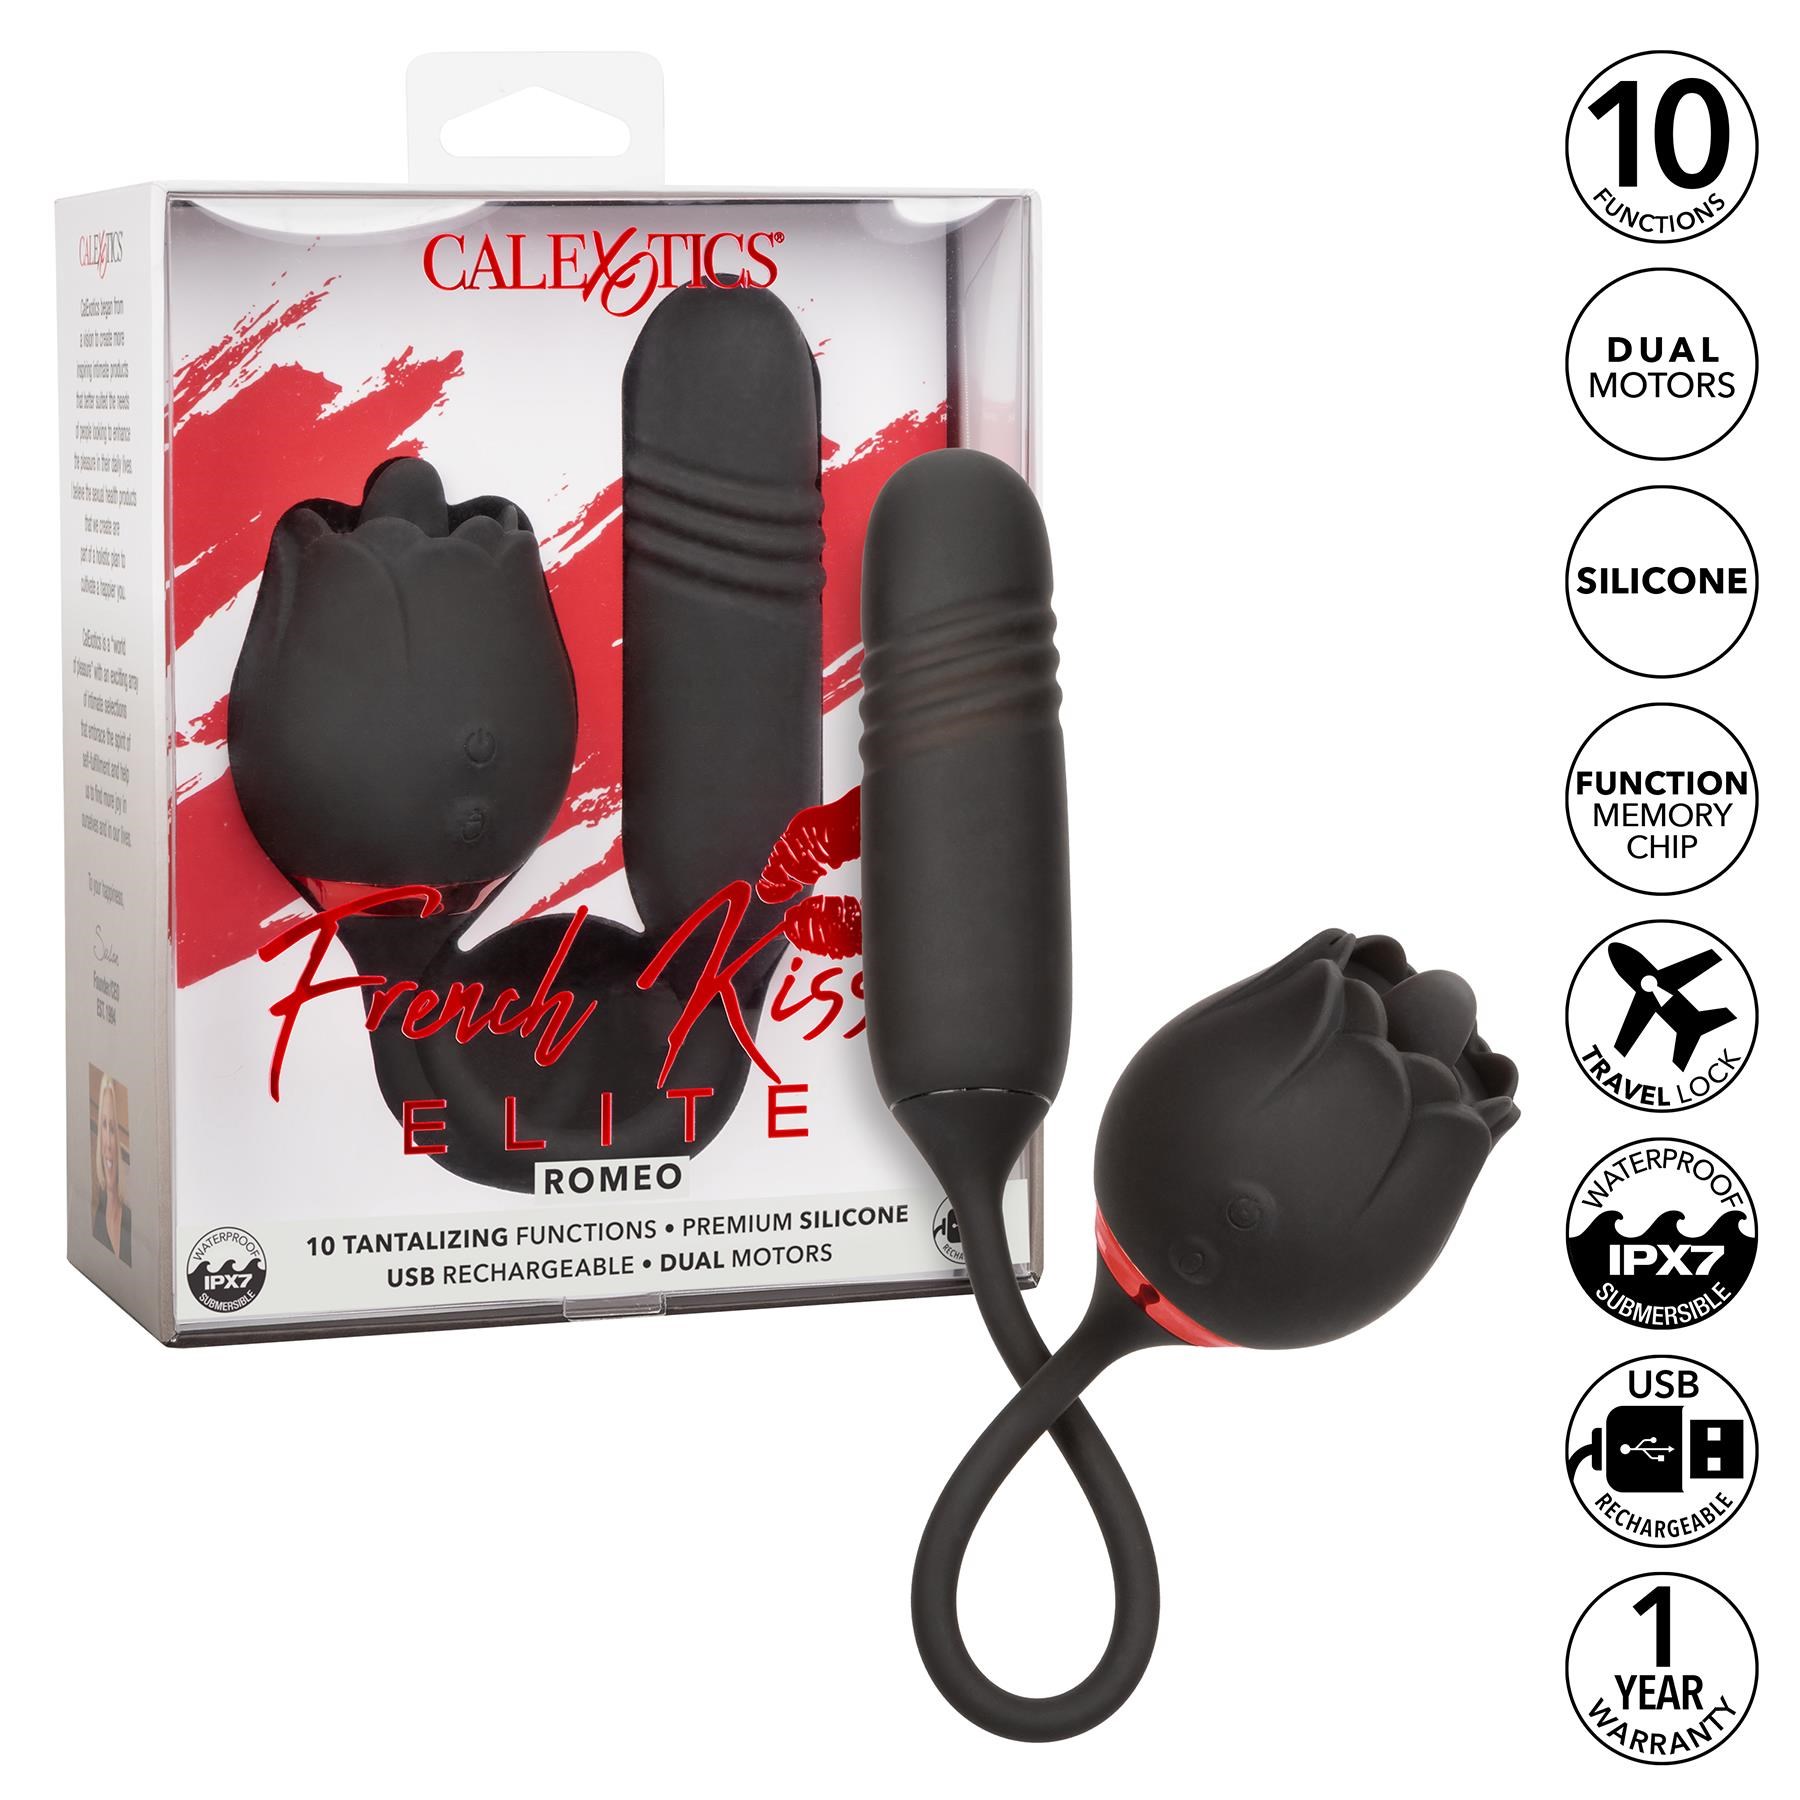 French Kiss Elite Romeo Clitoral and Thrusting Anal Vibrator - Features